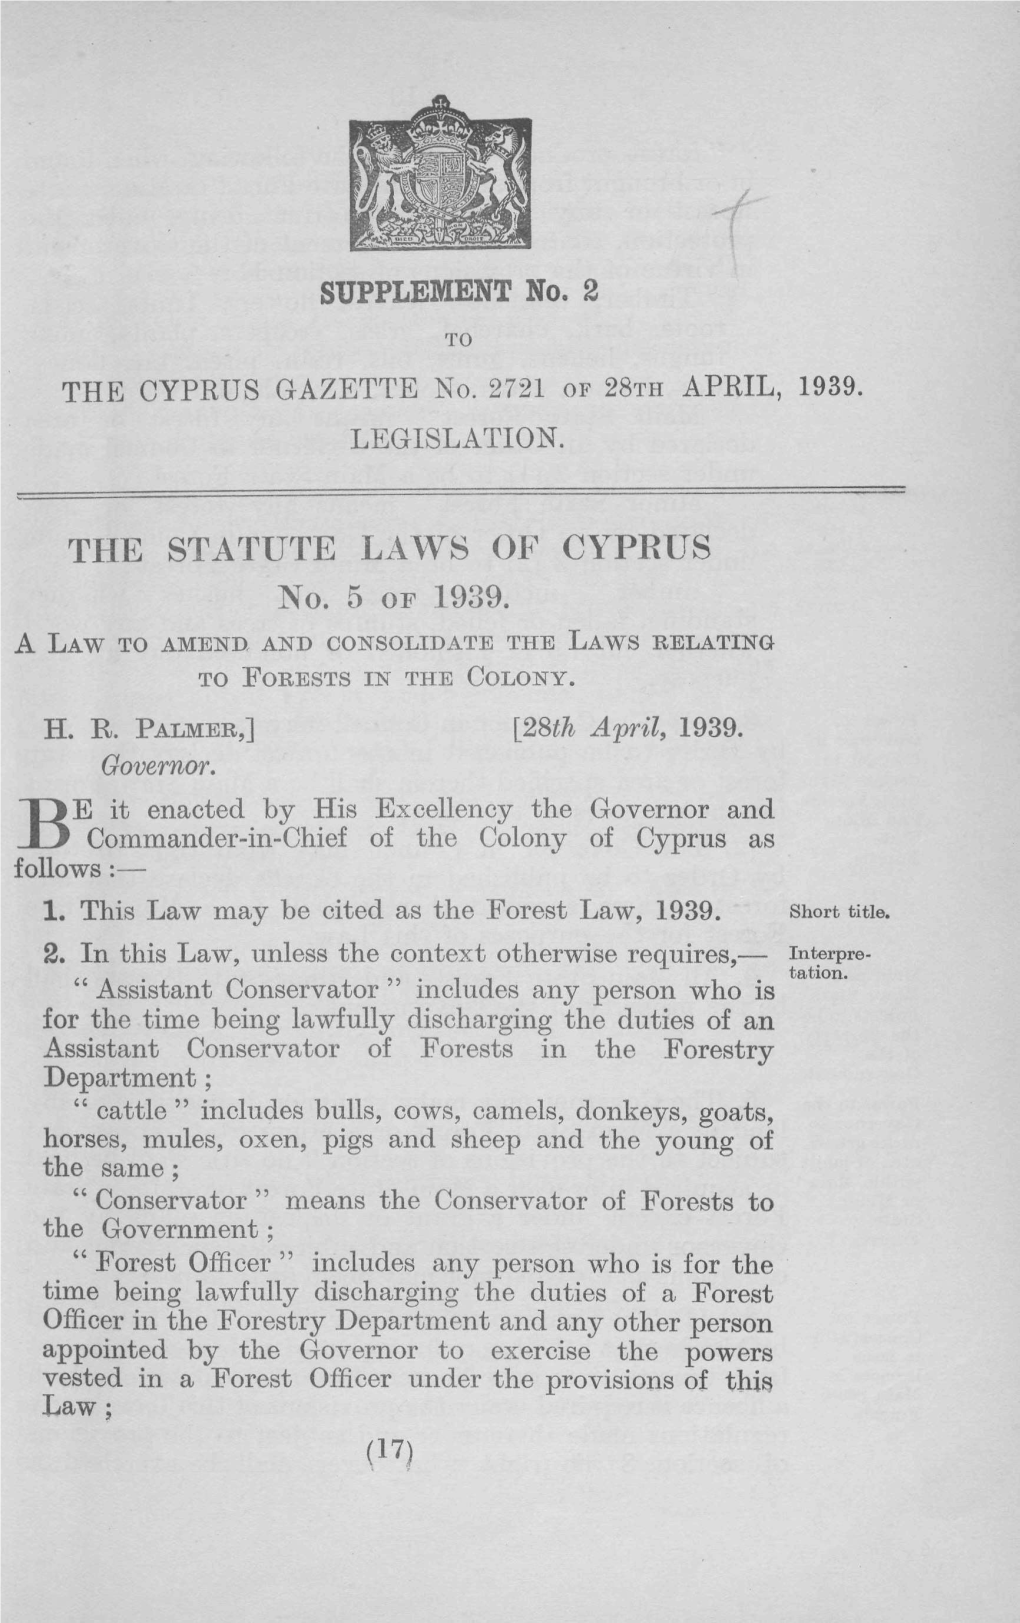 THE STATUTE LAWS of CYPRUS No. 5 Or 1939. a LAW to AMEND, and CONSOLIDATE the LAWS RELATING to FORESTS in the COLONY